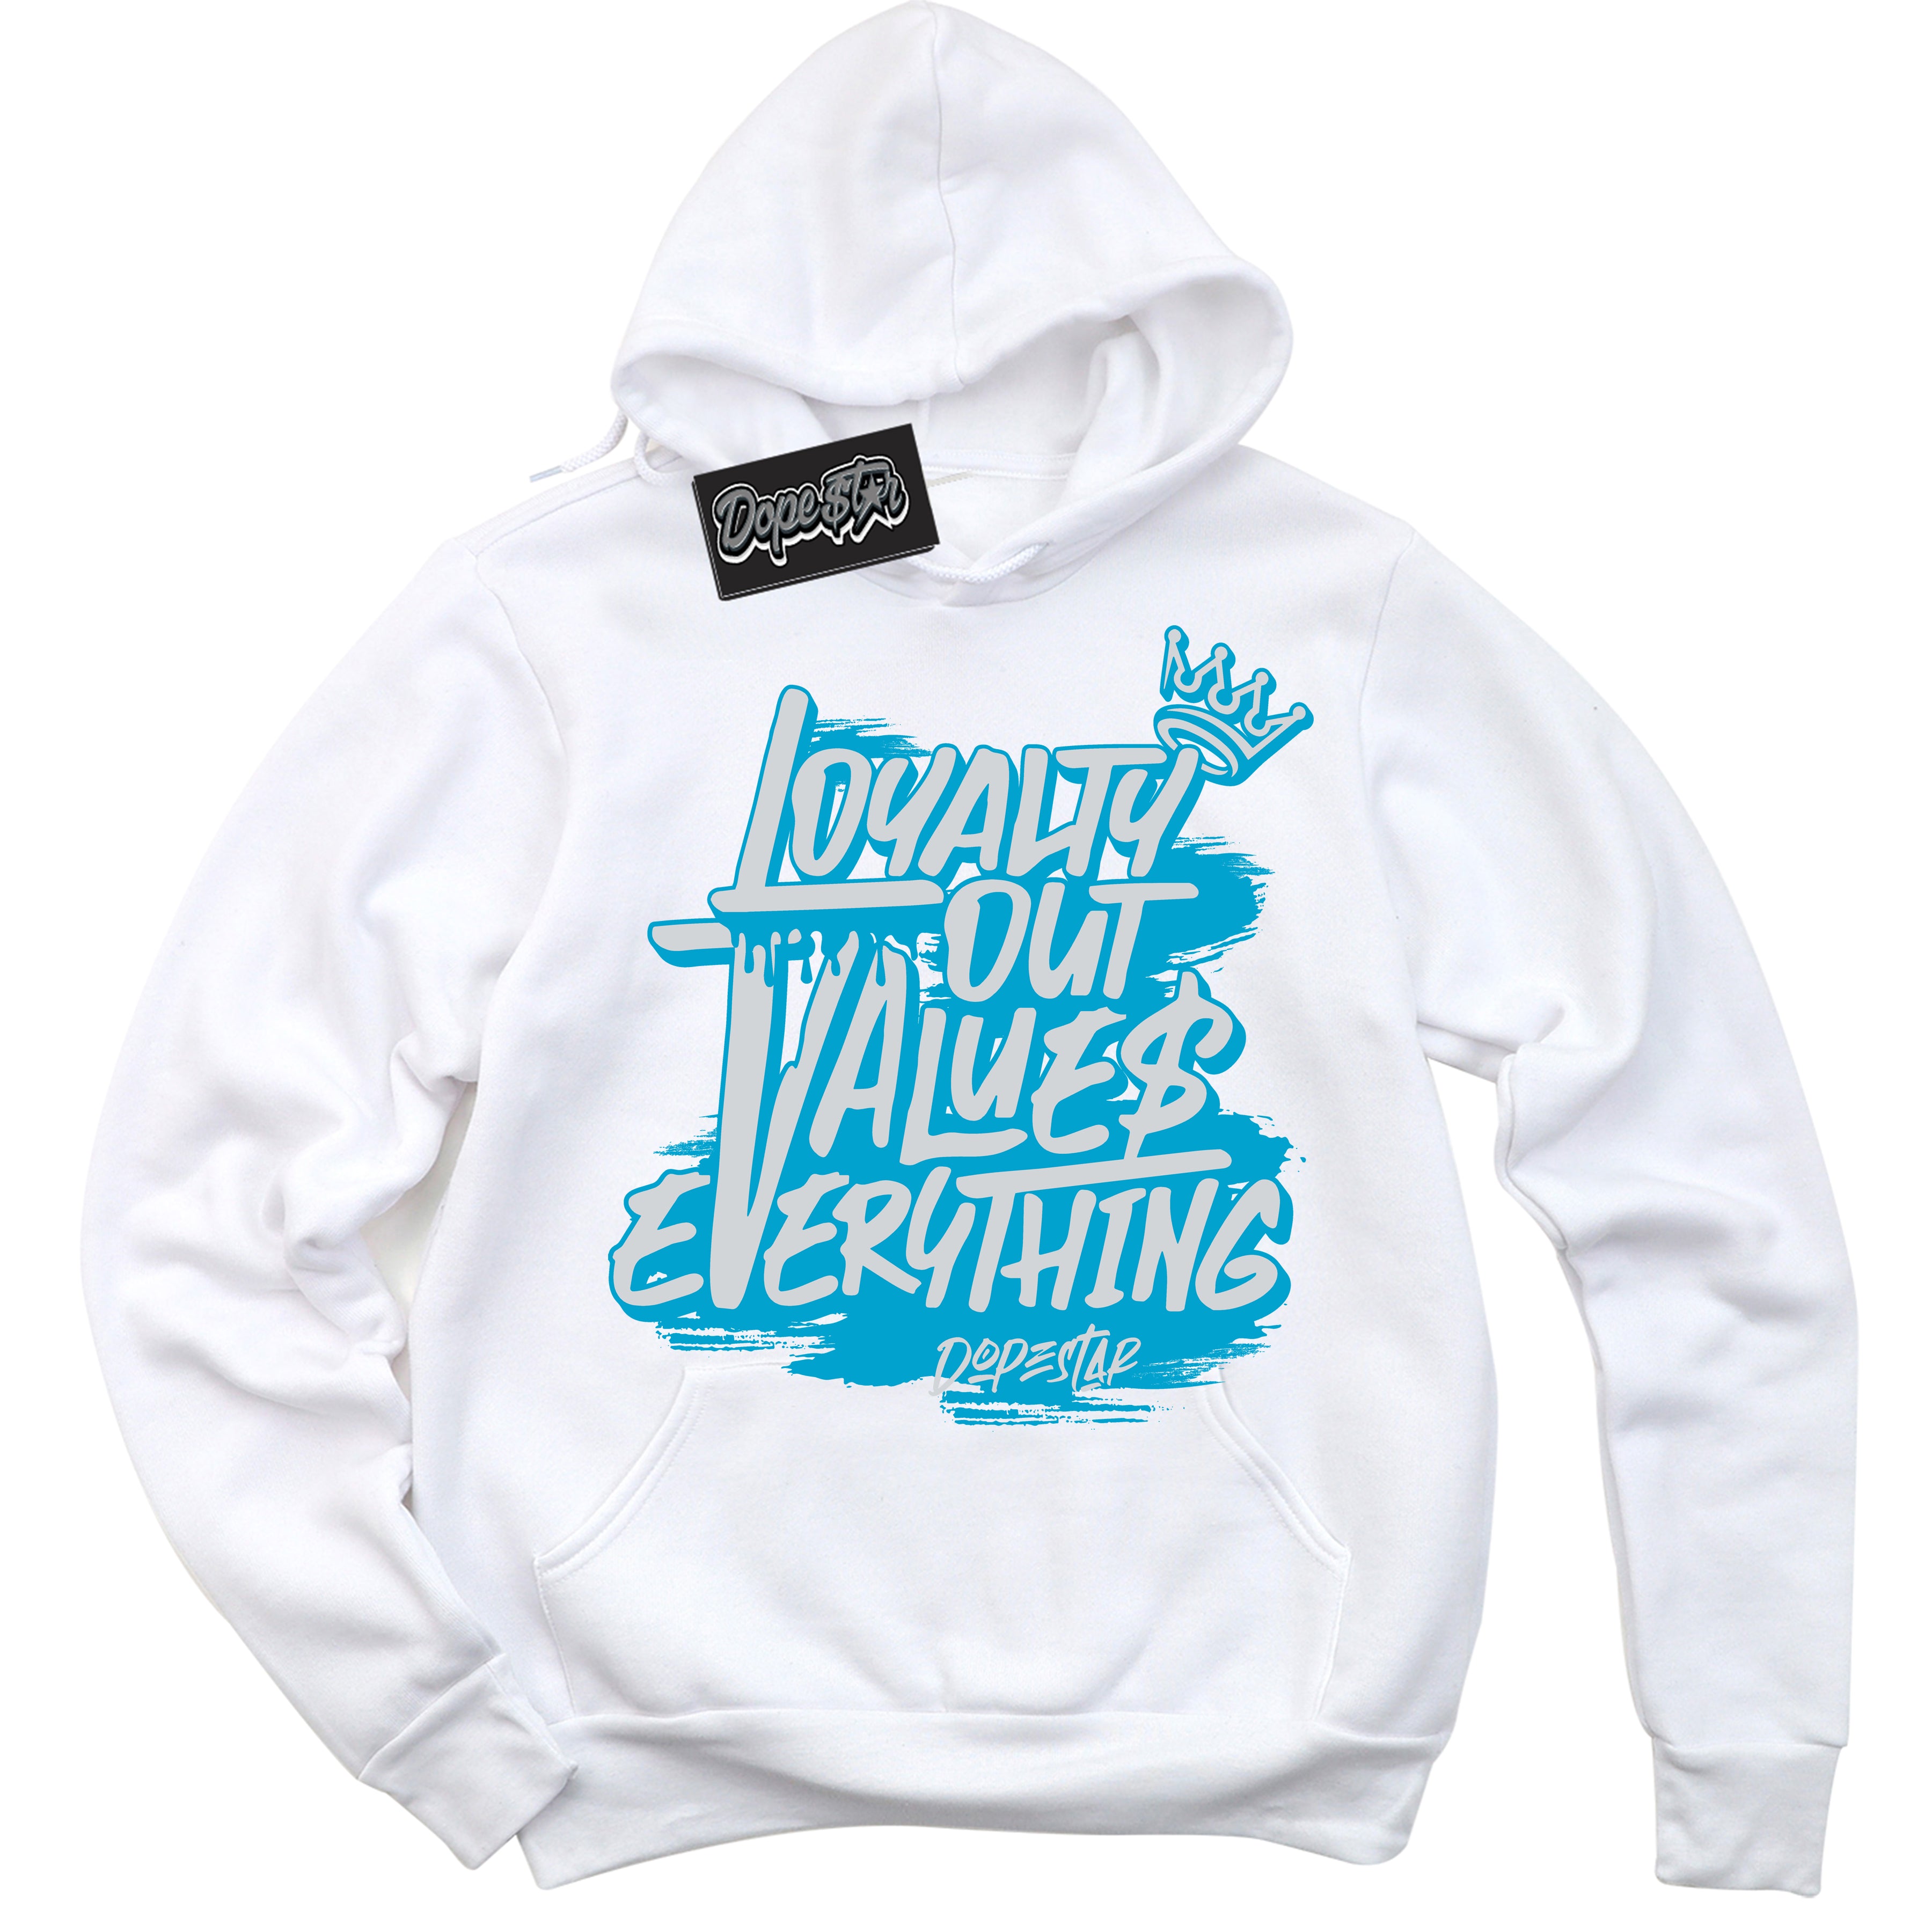 Cool White Hoodie with “ Loyalty Out Values Everything ”  design that Perfectly Matches Pure Platinum Blue Lightning Sneakers.